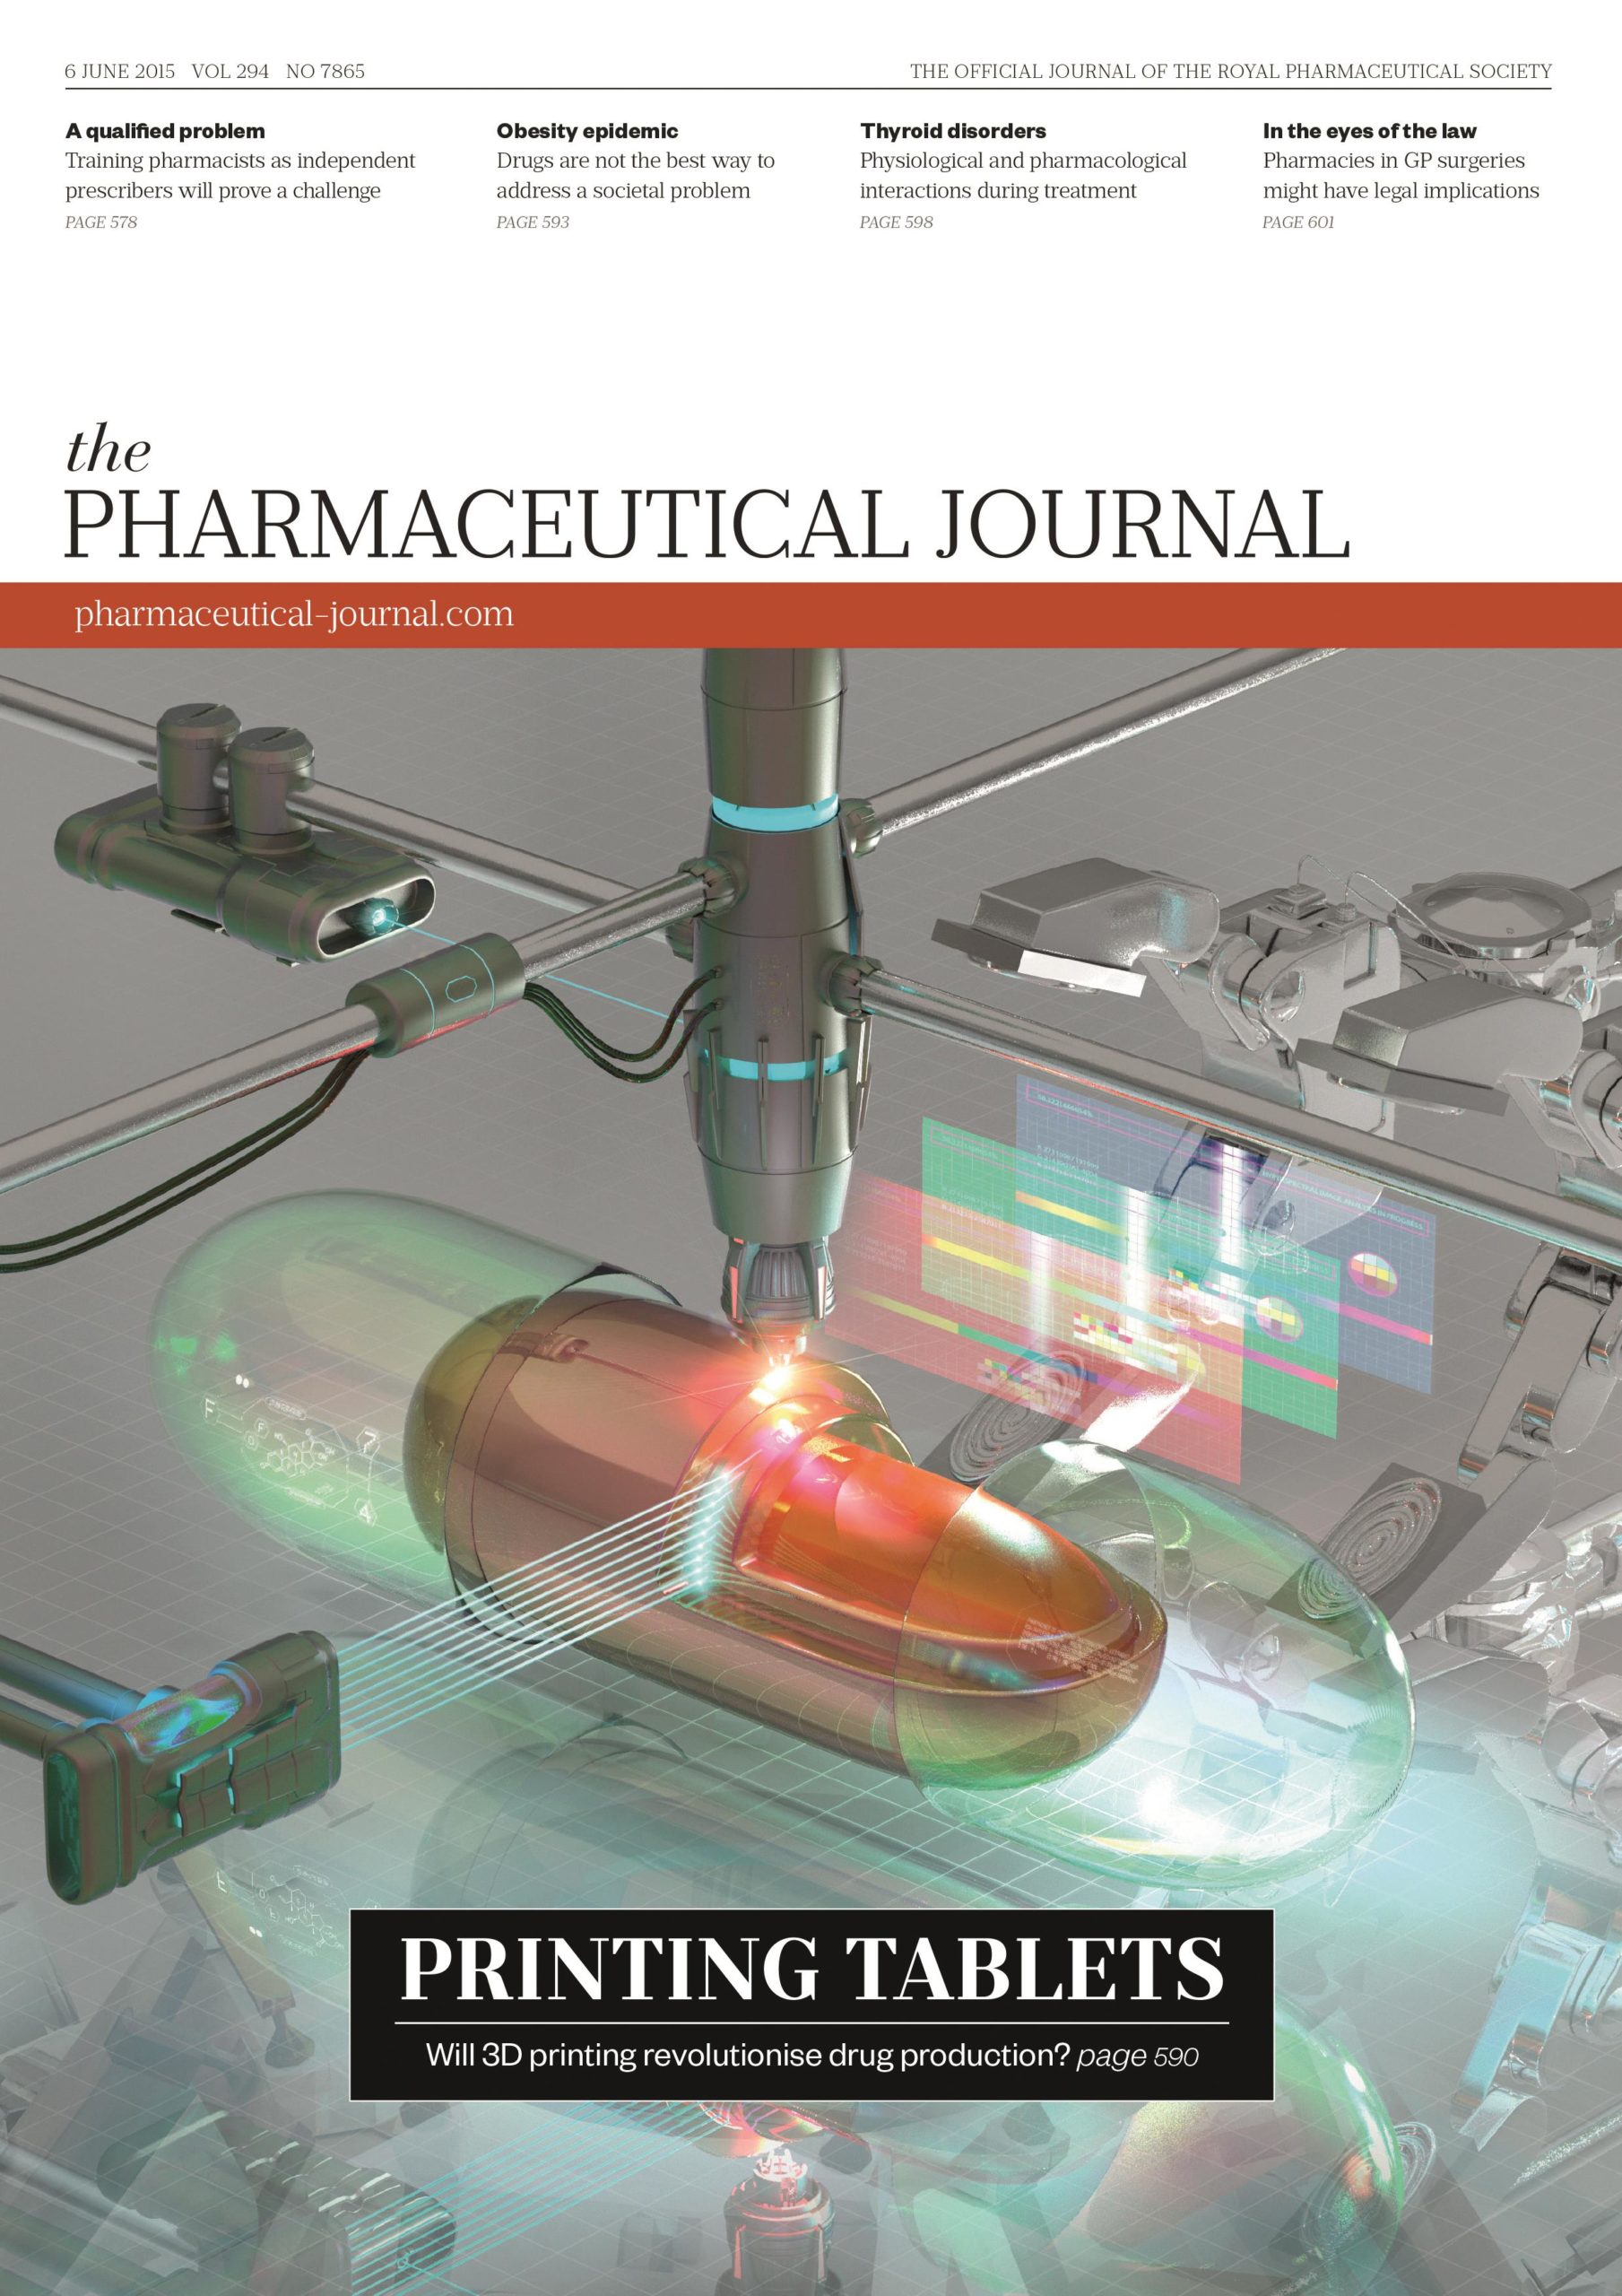 Publication issue cover for PJ, 6 June 2015, Vol 294, No 7865